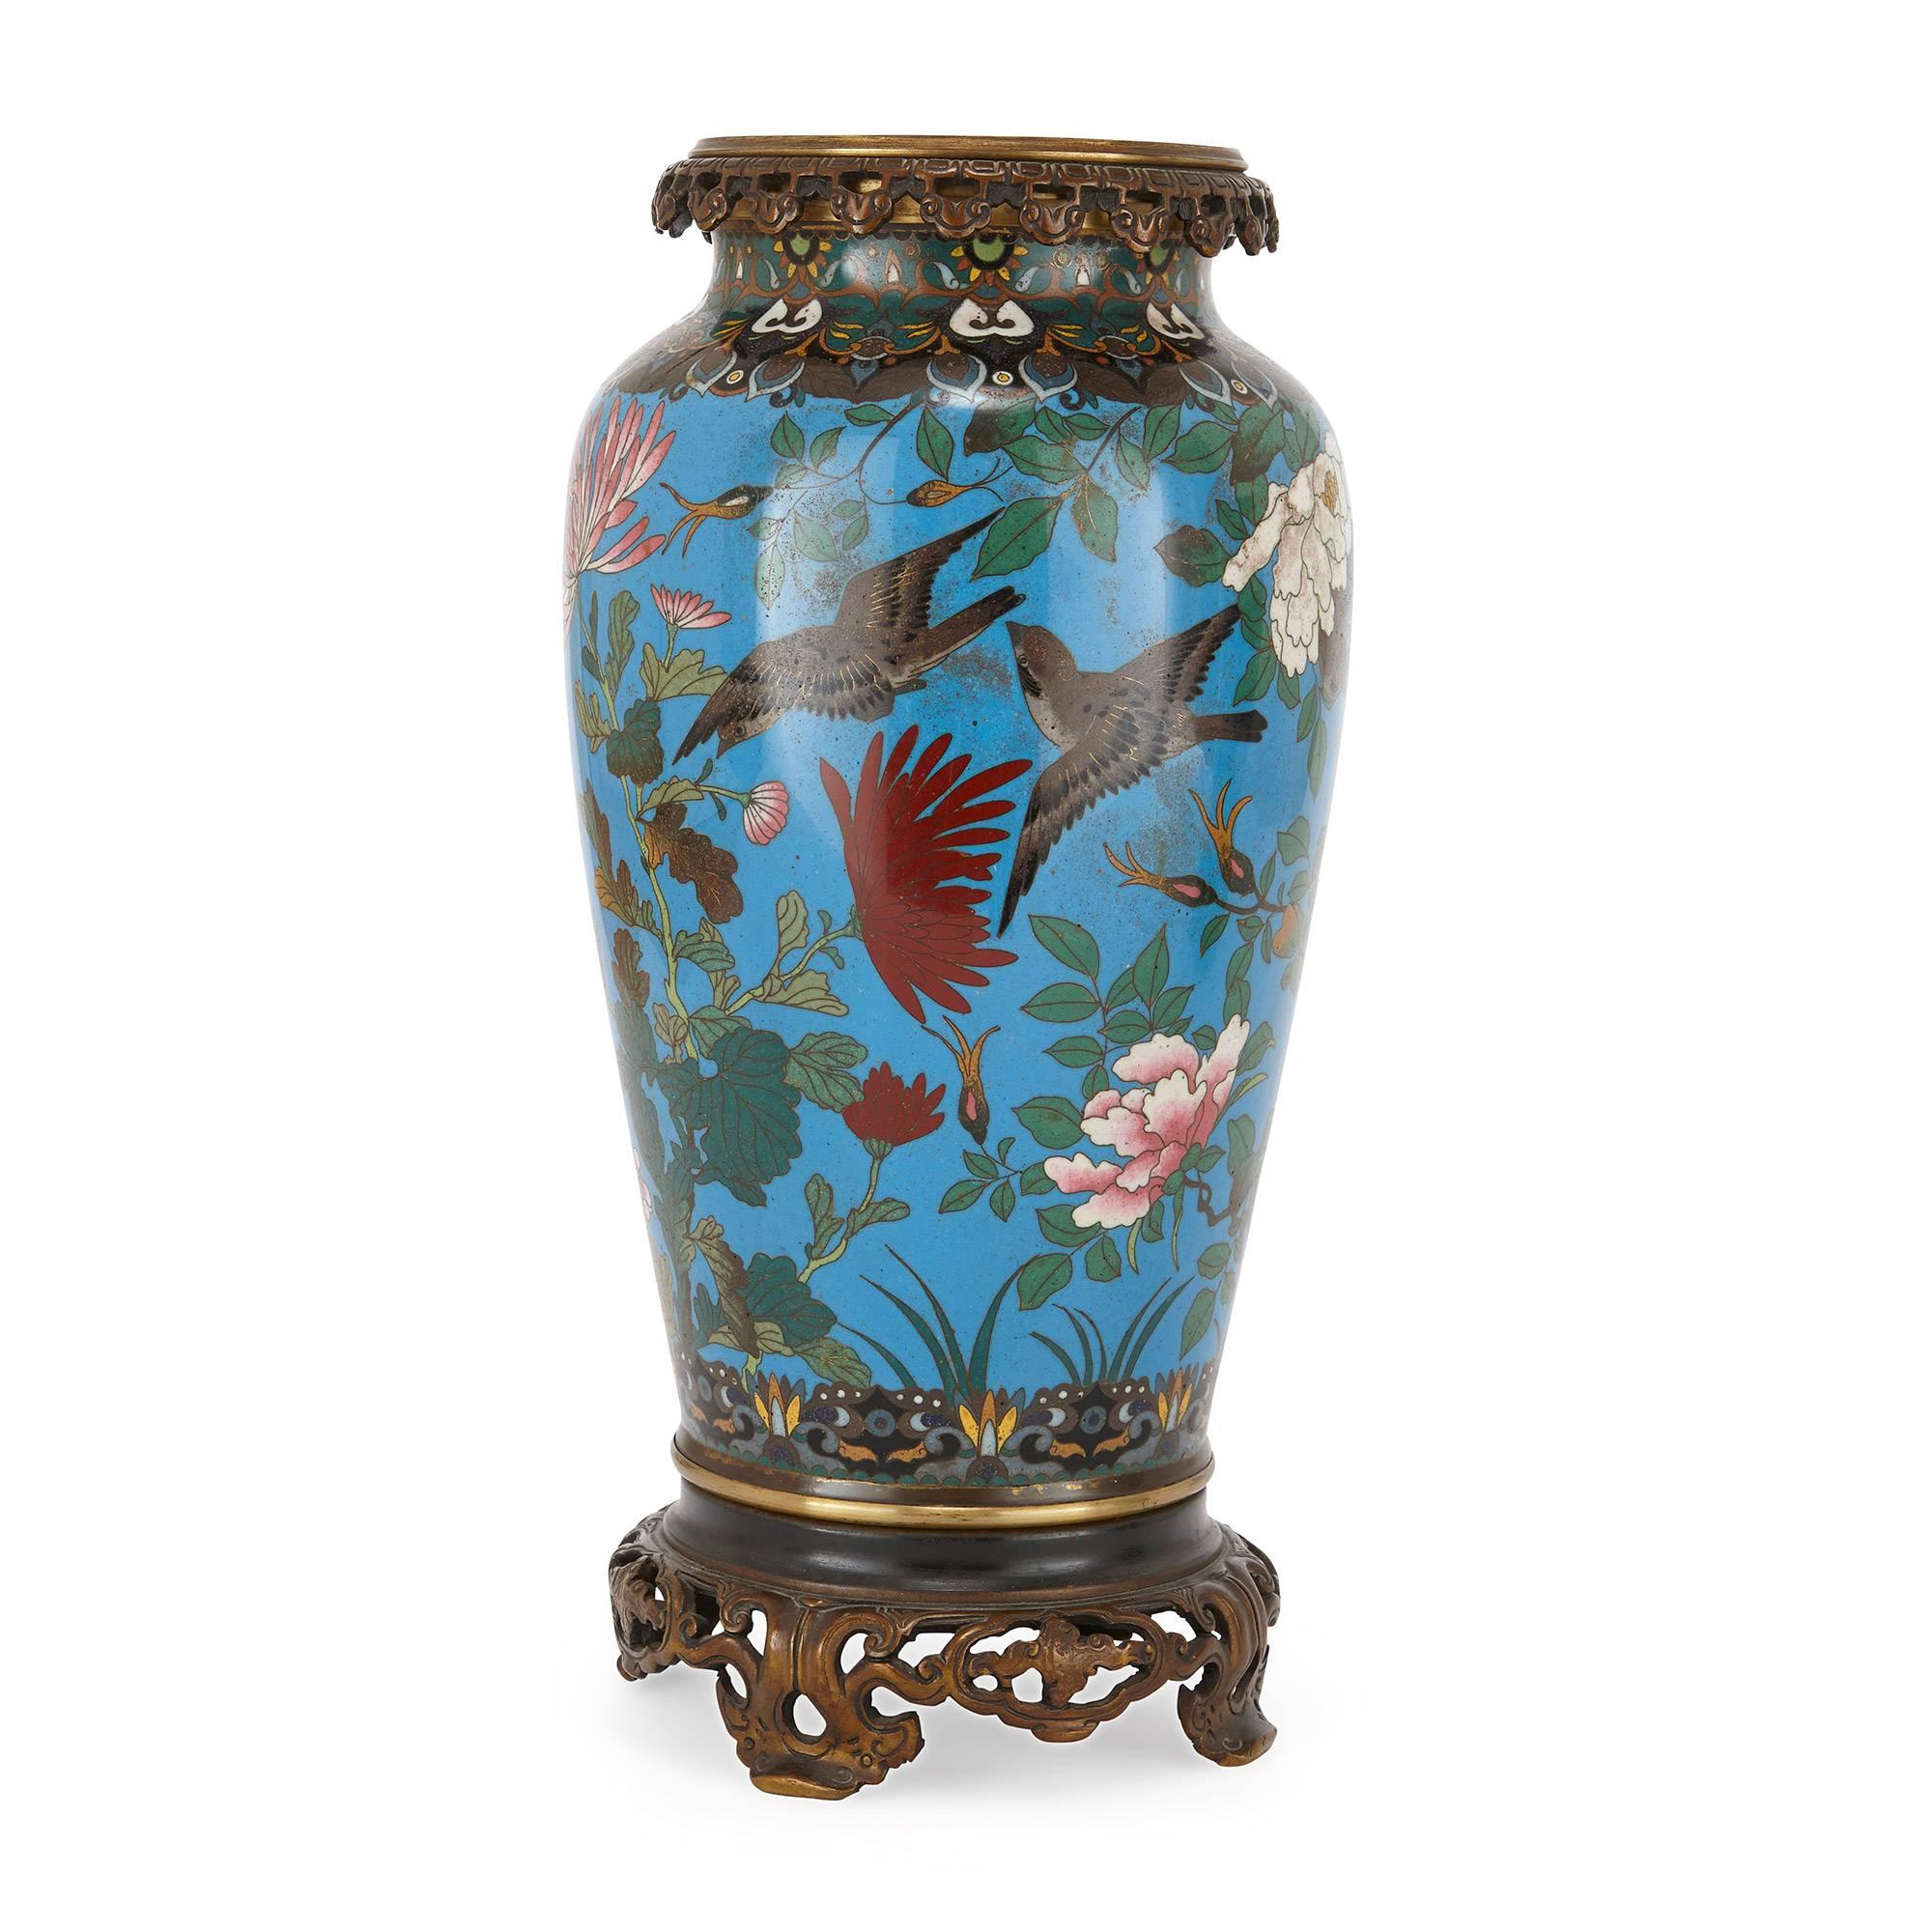 Of ovoid form with a pierced ormolu rim, decorated throughout with birds, flowers and foliage, raised on pierced ormolu feet; the enamel Japanese, the ormolu French, late 19th century.

These exquisite Japanese vases were crafted during the Meiji